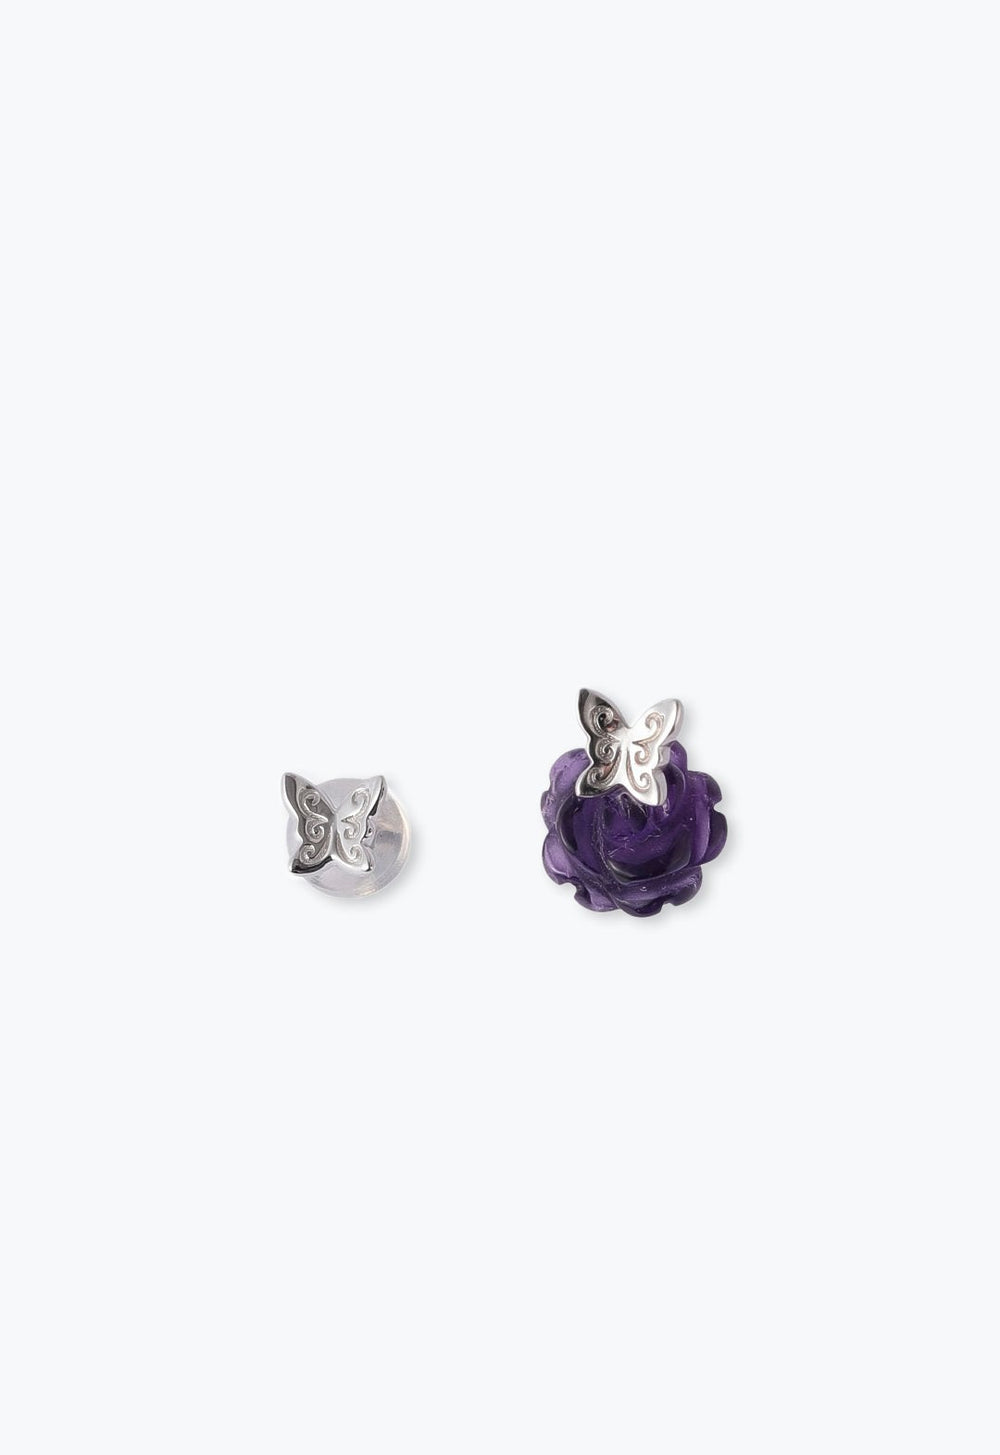 Rose/Butterfly Earrings, one silver butterfly on Amethyst rose, other is just a silver butterfly